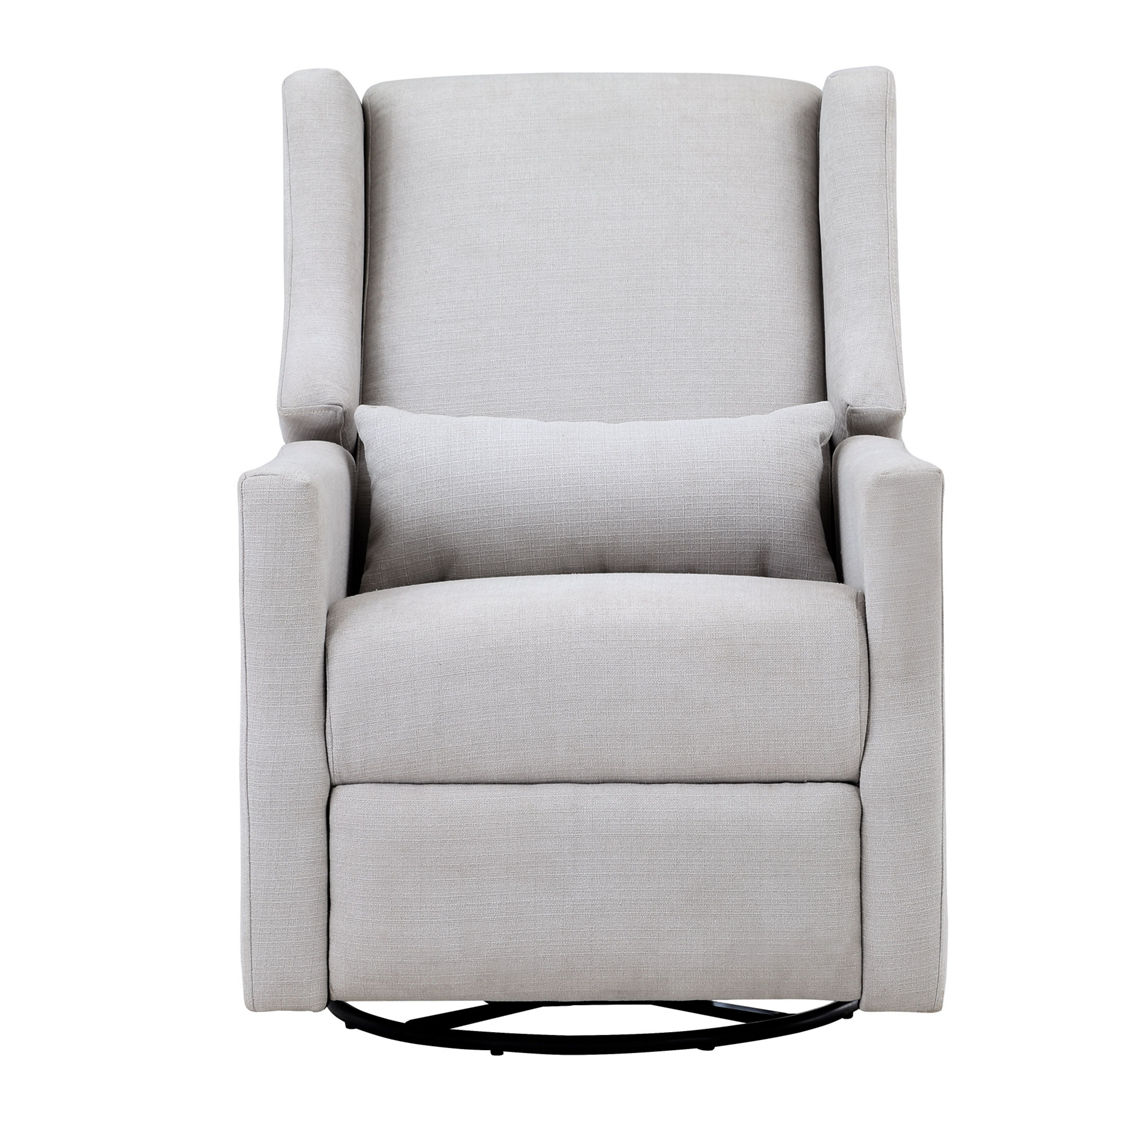 Suite Bebe Pronto Swivel Glider Recliner with Pillow Blanco Fabric - Image 2 of 5